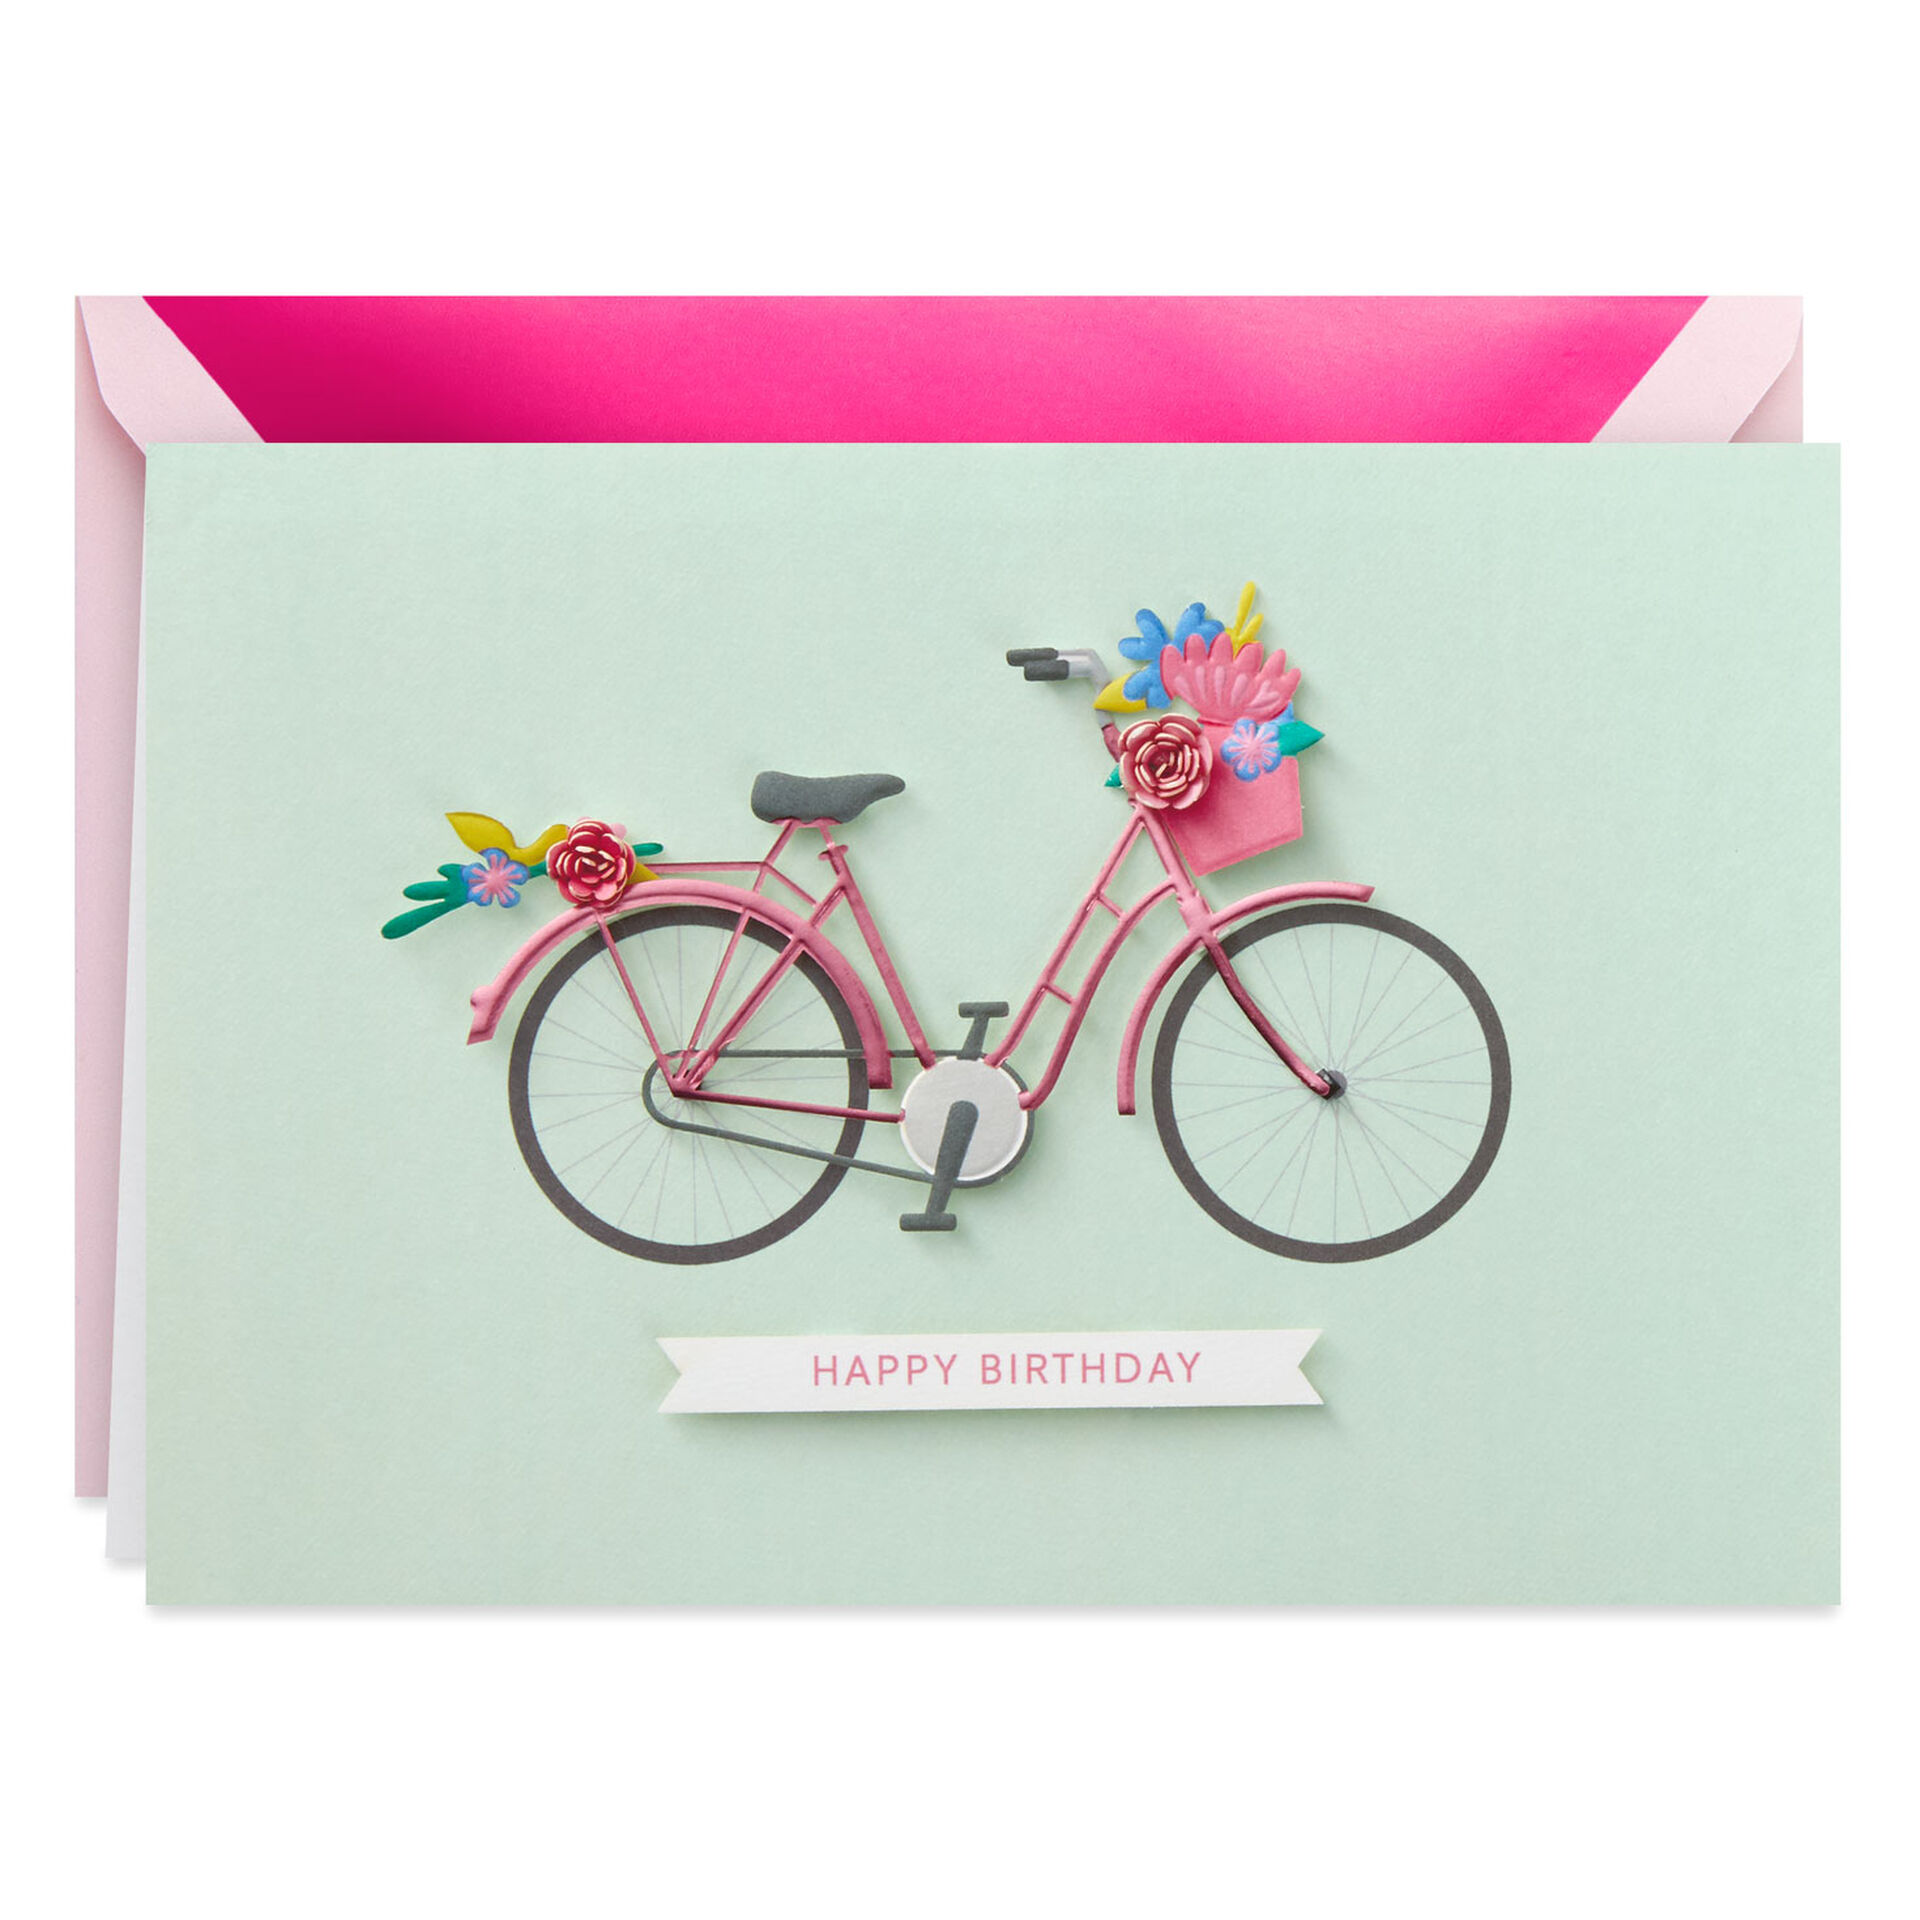 Retro-Bike-With-Flower-Basket-Birthday-Card-for-Her_699LAD9351_01